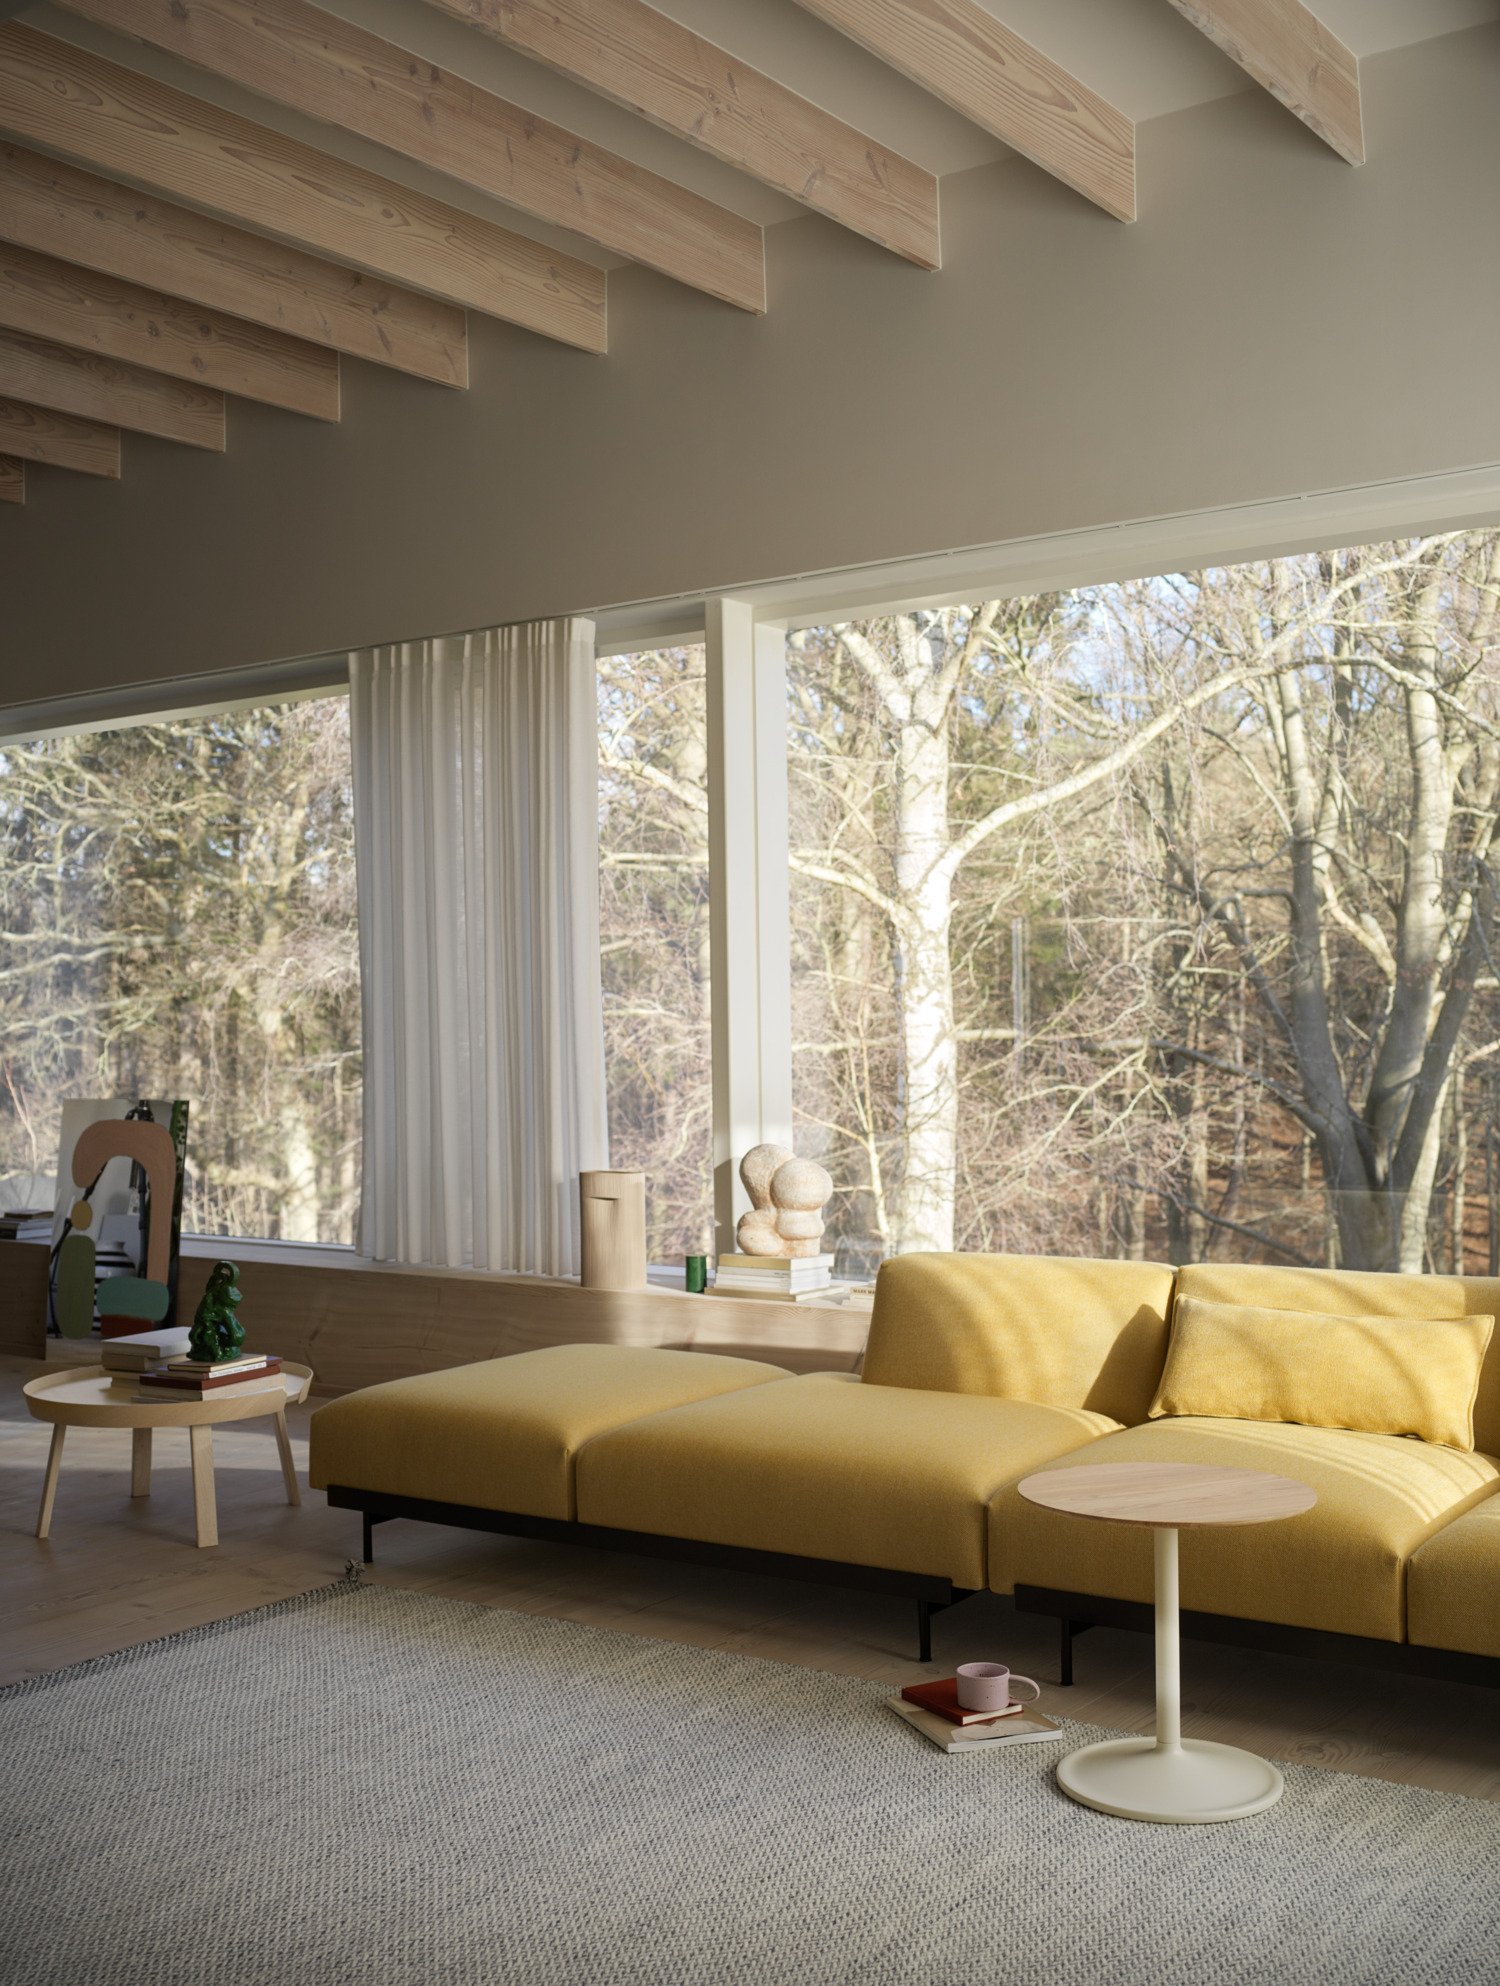 In Situ Sofa in Hallingdal 407 - Soft Side Table in Off-White/Solid Oak - Around Coffee Table L in Ash